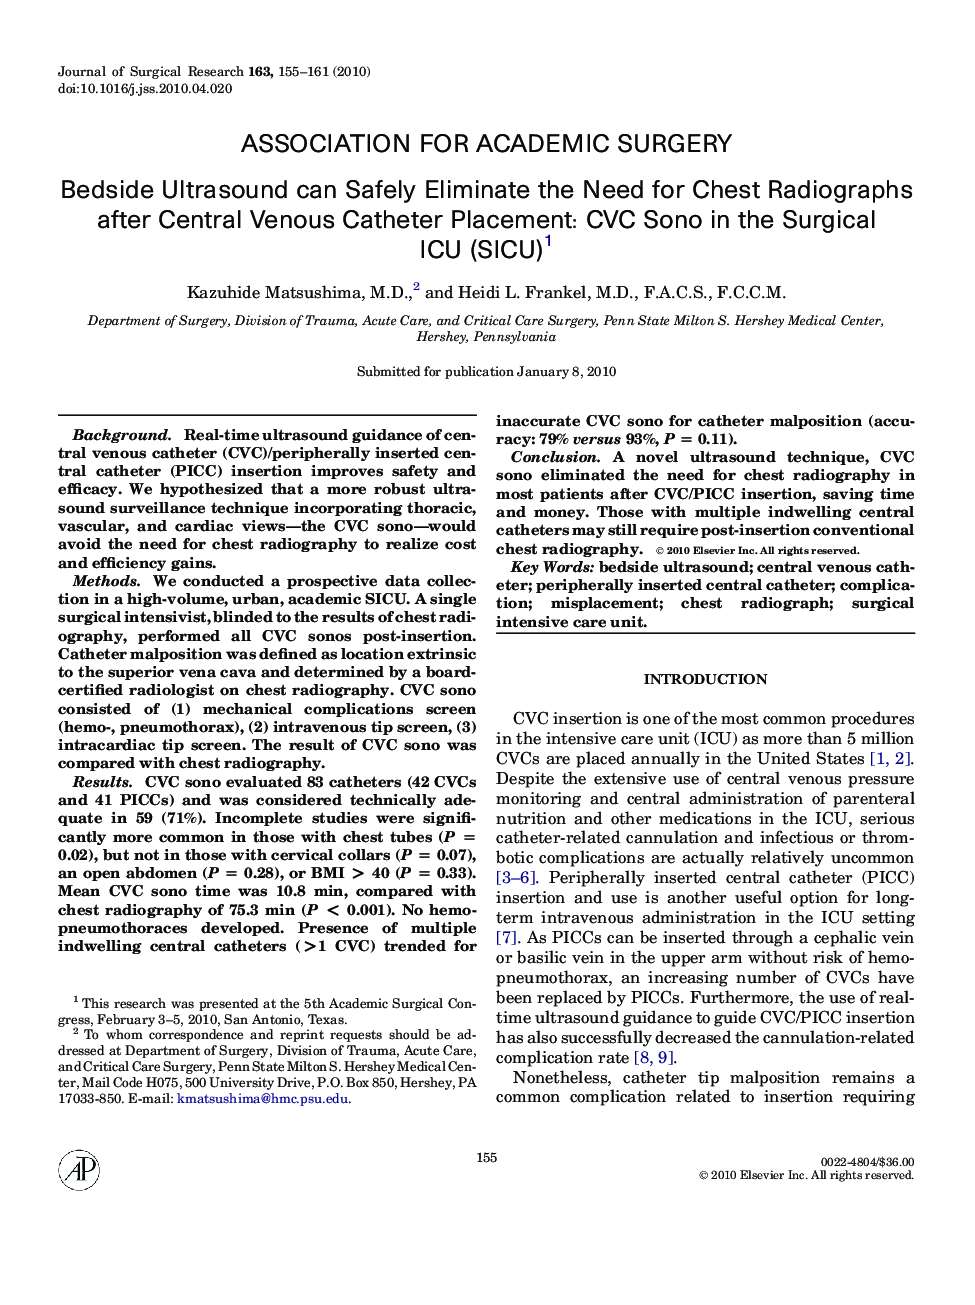 Bedside Ultrasound can Safely Eliminate the Need for Chest Radiographs after Central Venous Catheter Placement: CVC Sono in the Surgical ICU (SICU)1